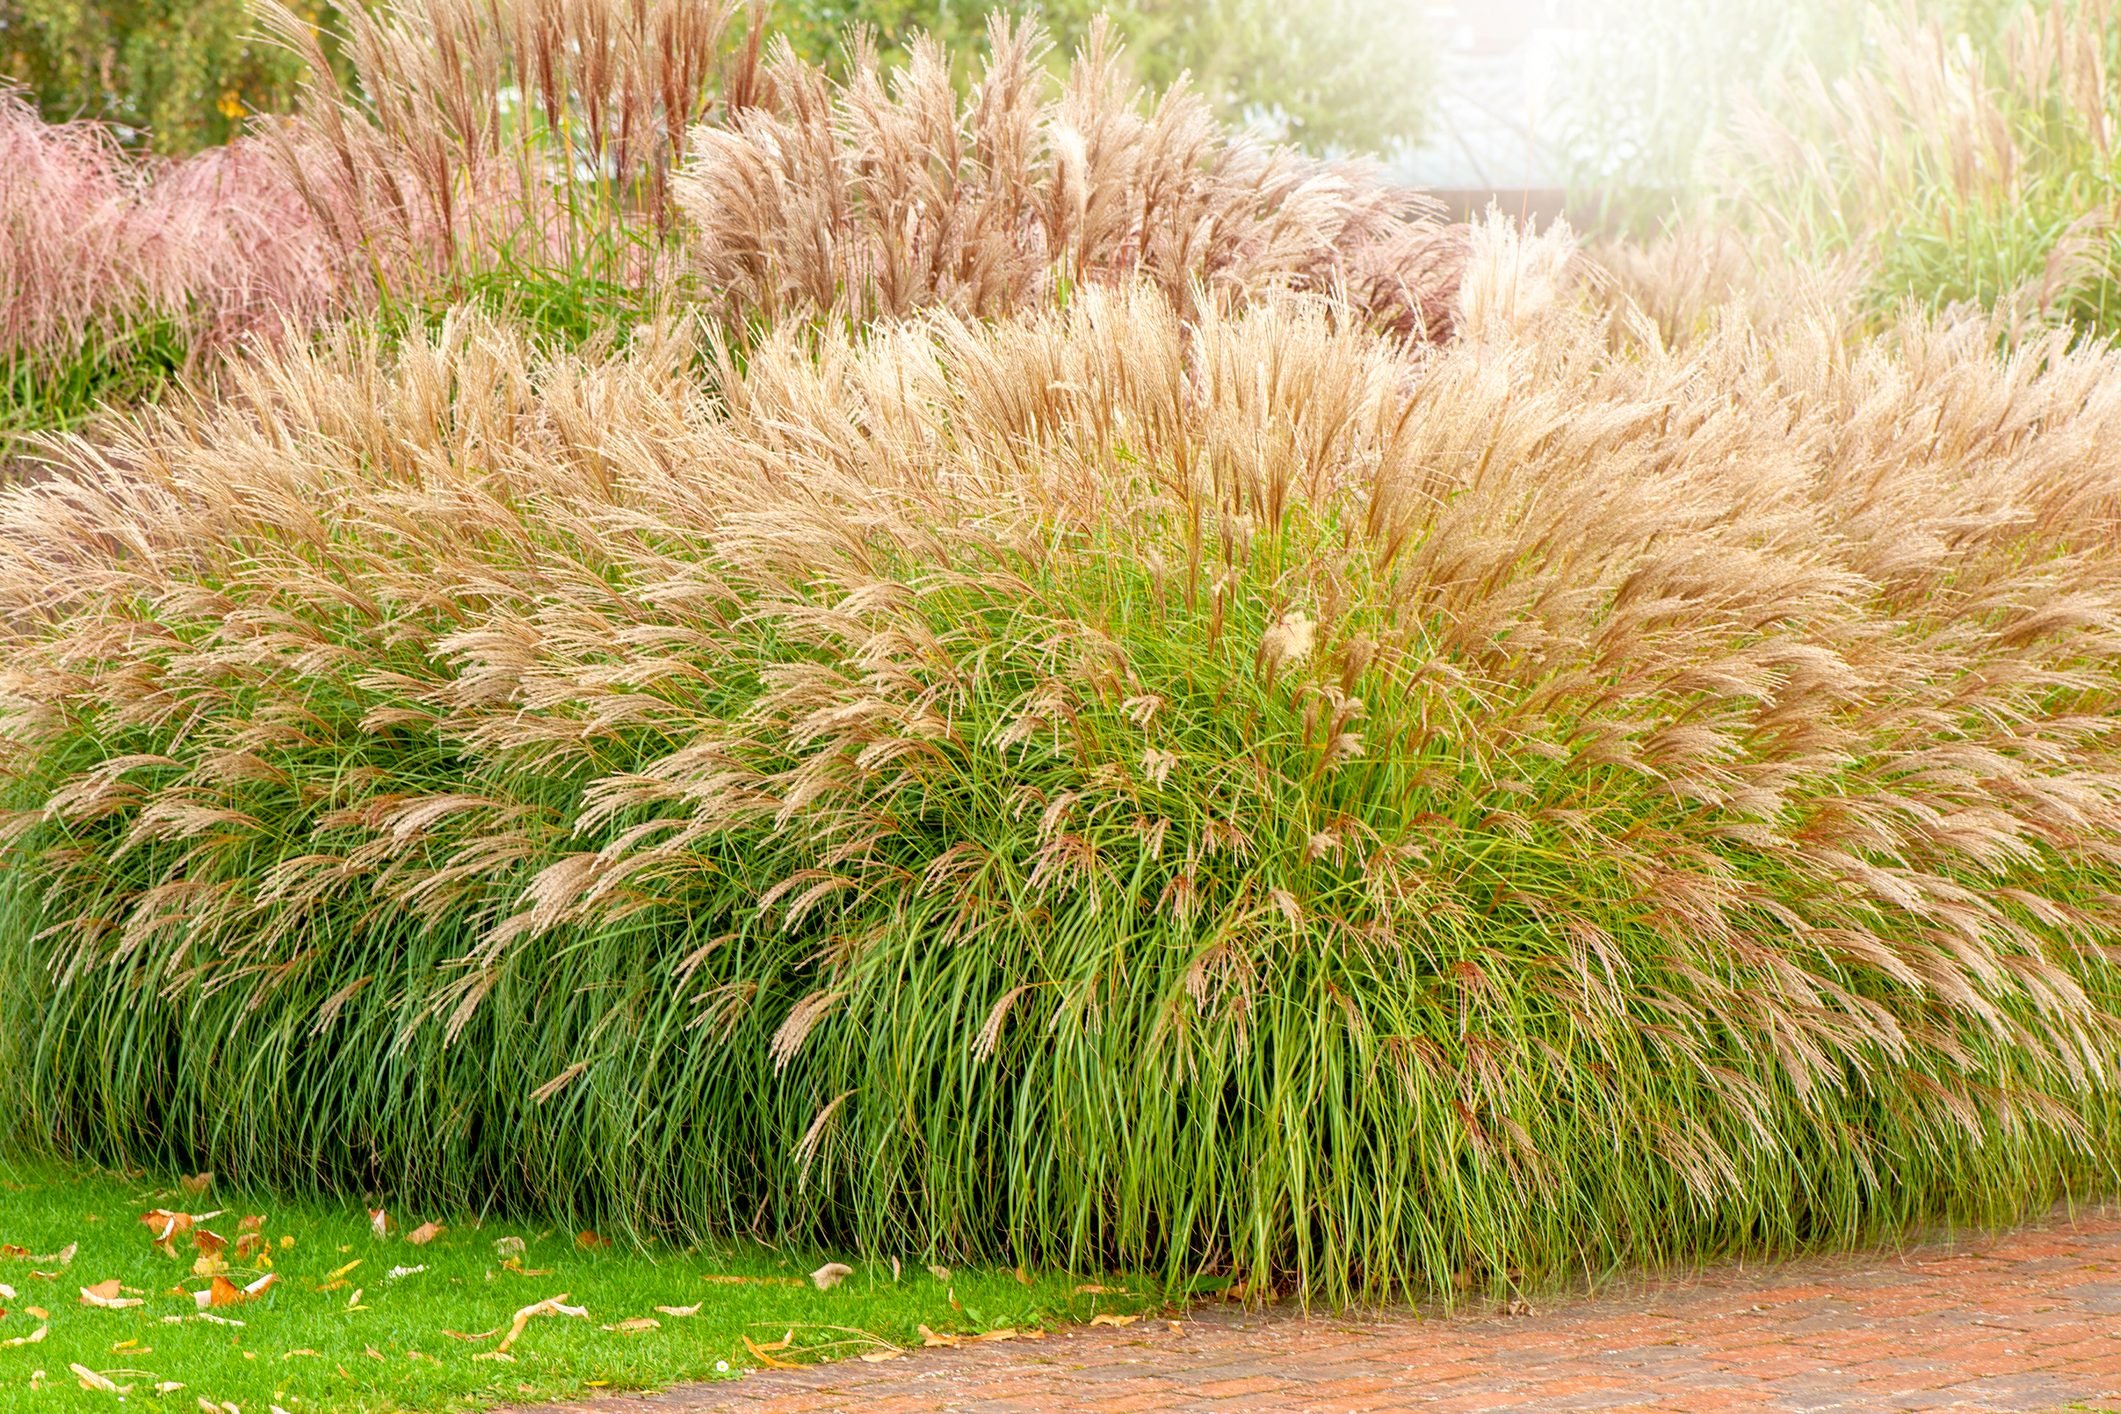 How to Incorporate Ornamental Grasses in Your Landscape Design